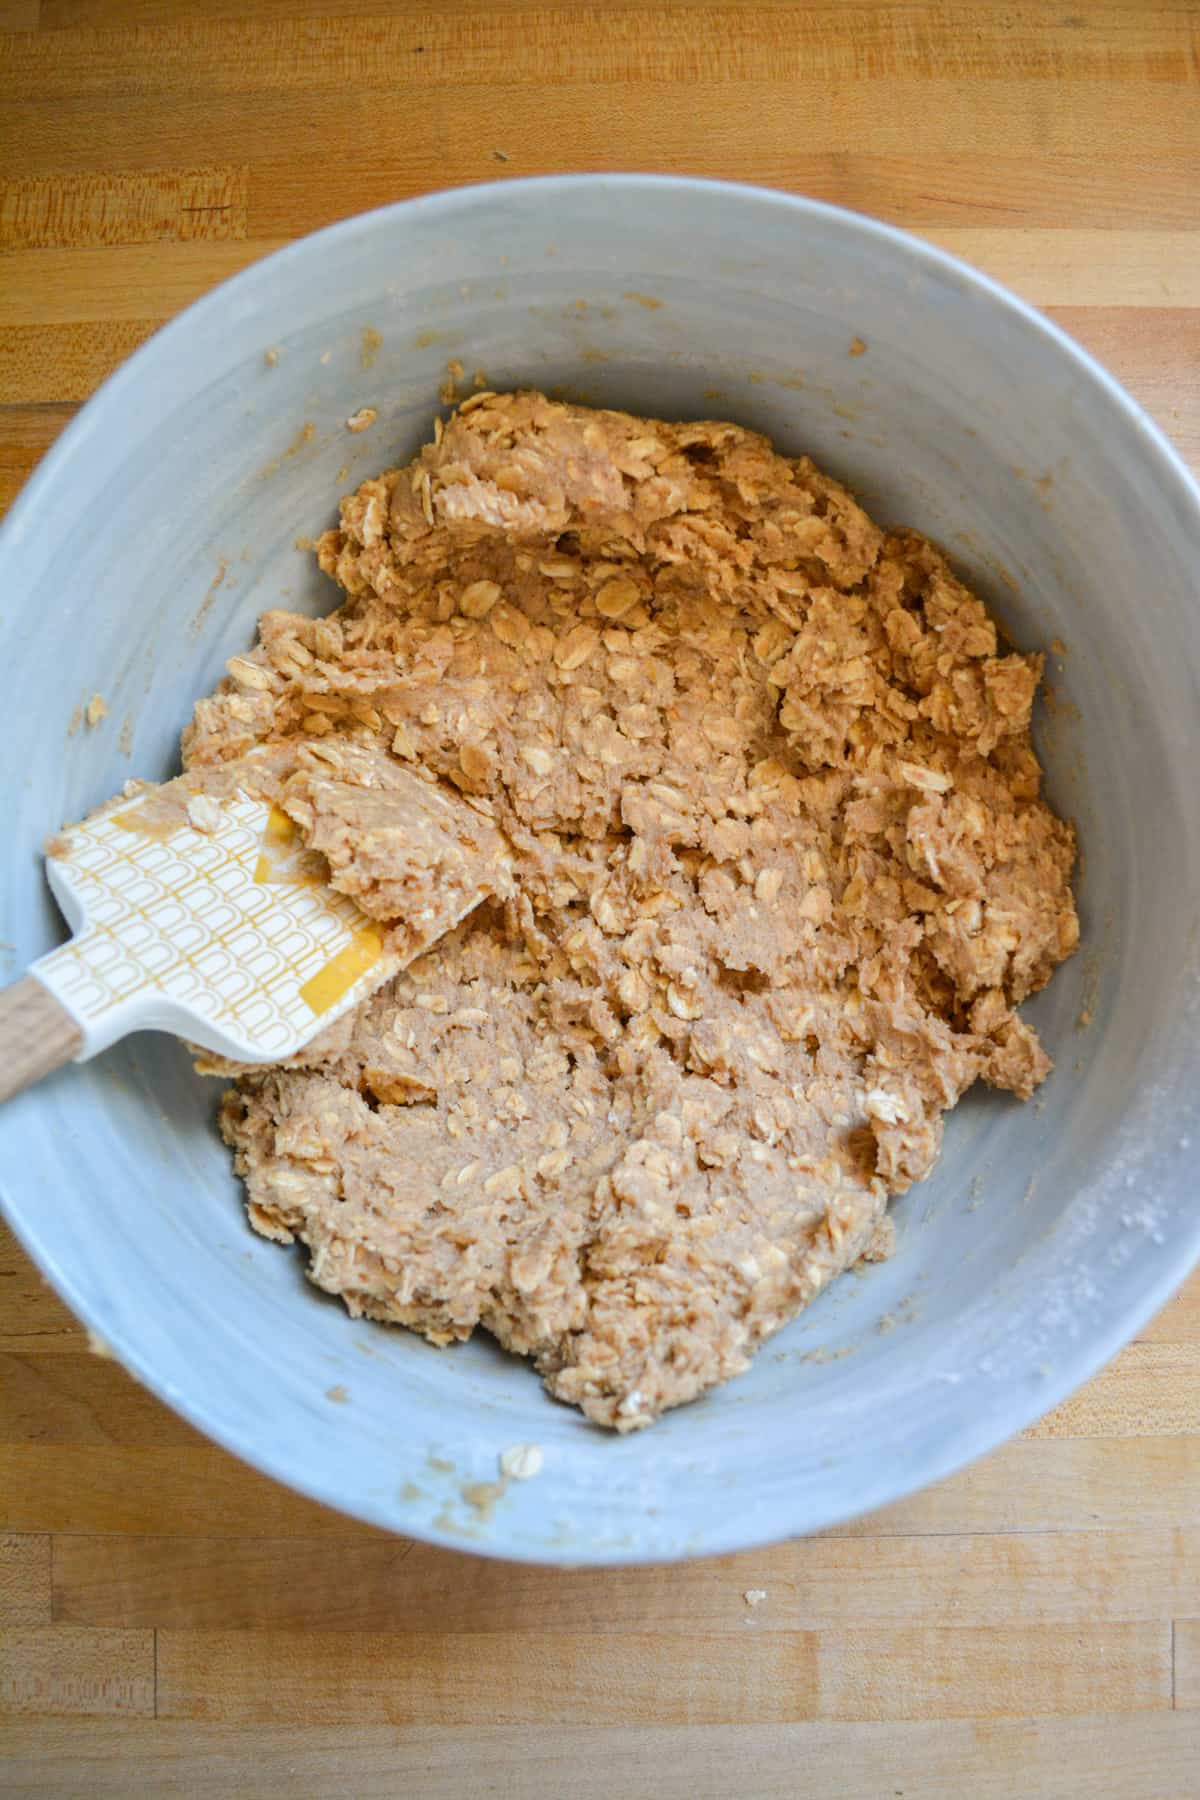 Flour and rolled oats added to the creamed mixture to form the vegan oatmeal cookie dough.